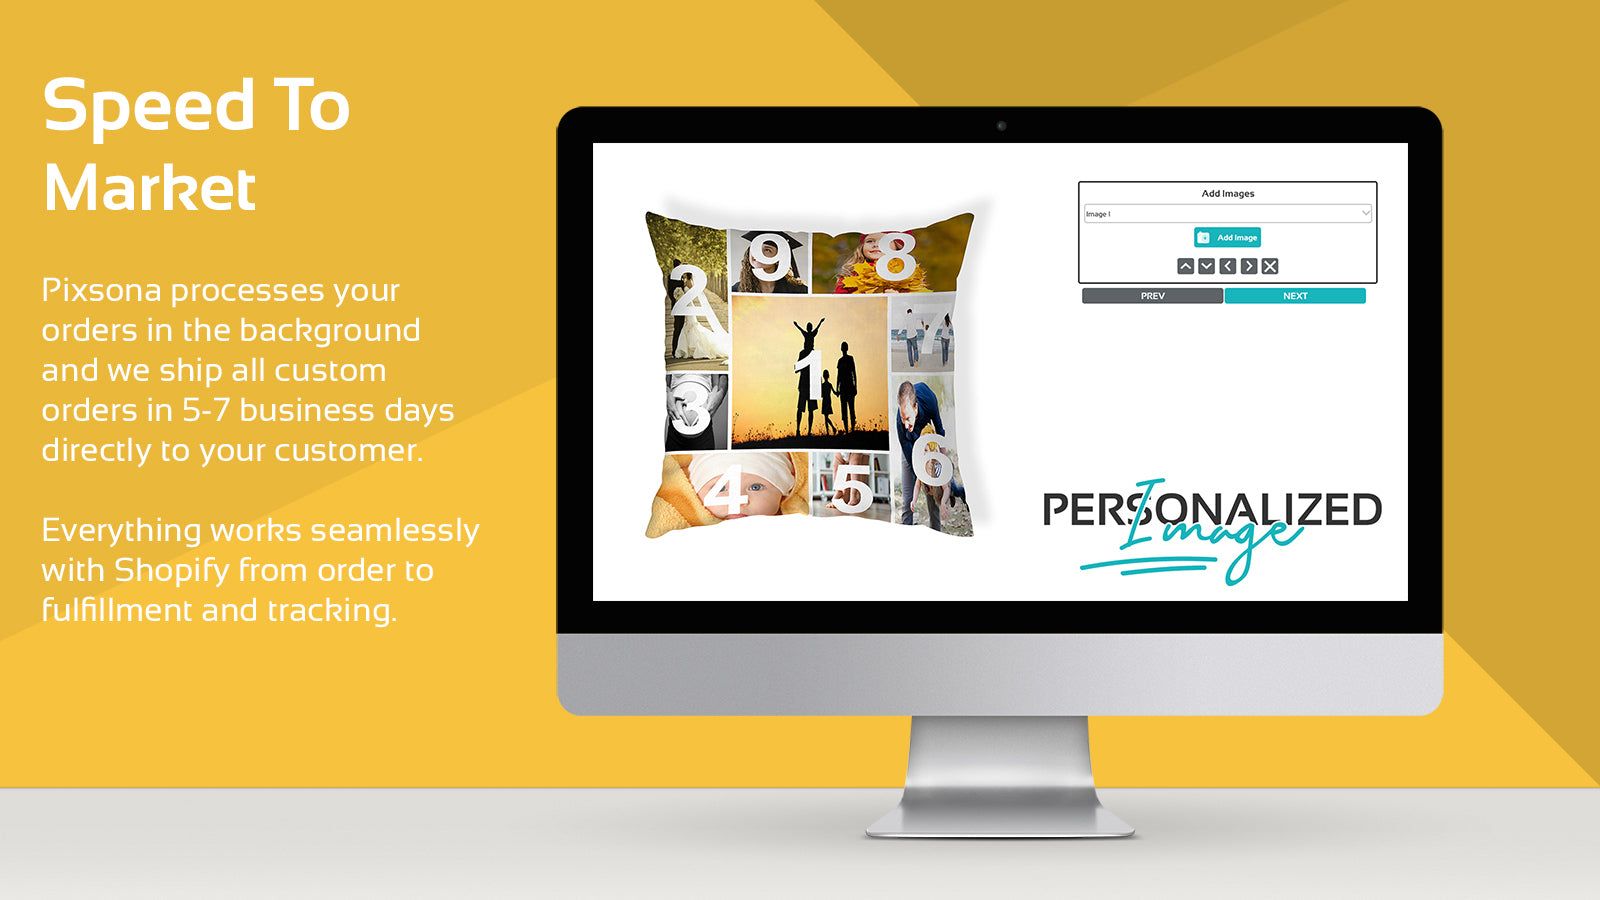 Live Time Personalization | Image Personalization | Speed